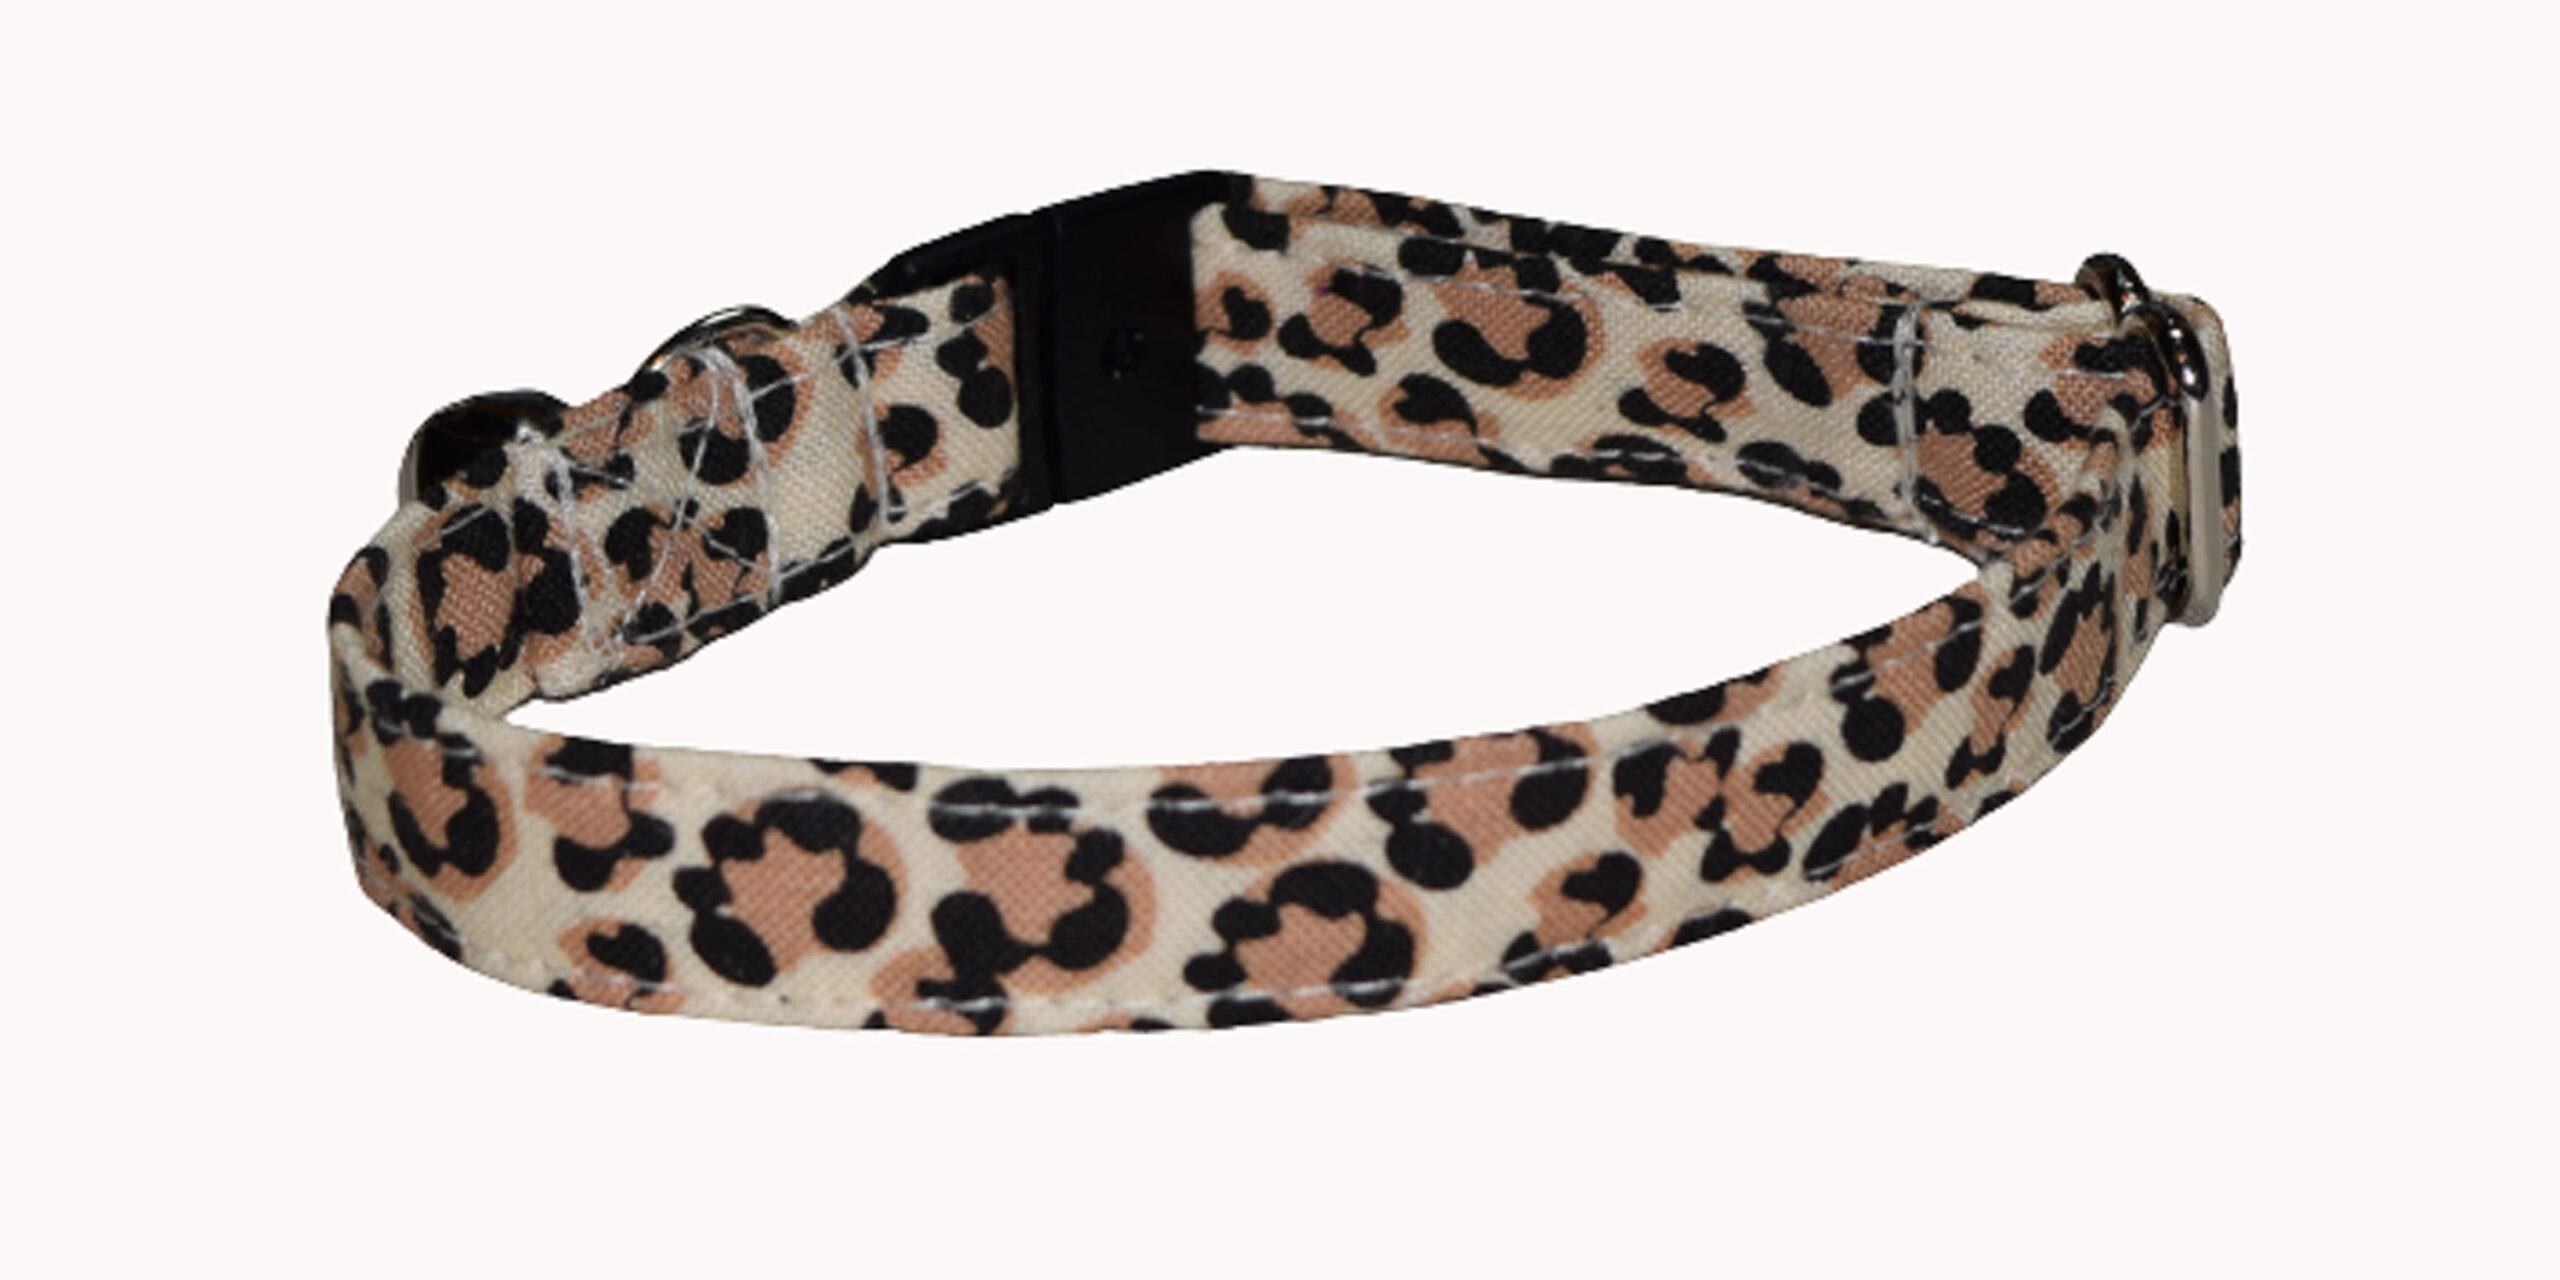 Leopard Print Wholesale Dog and Cat Collars